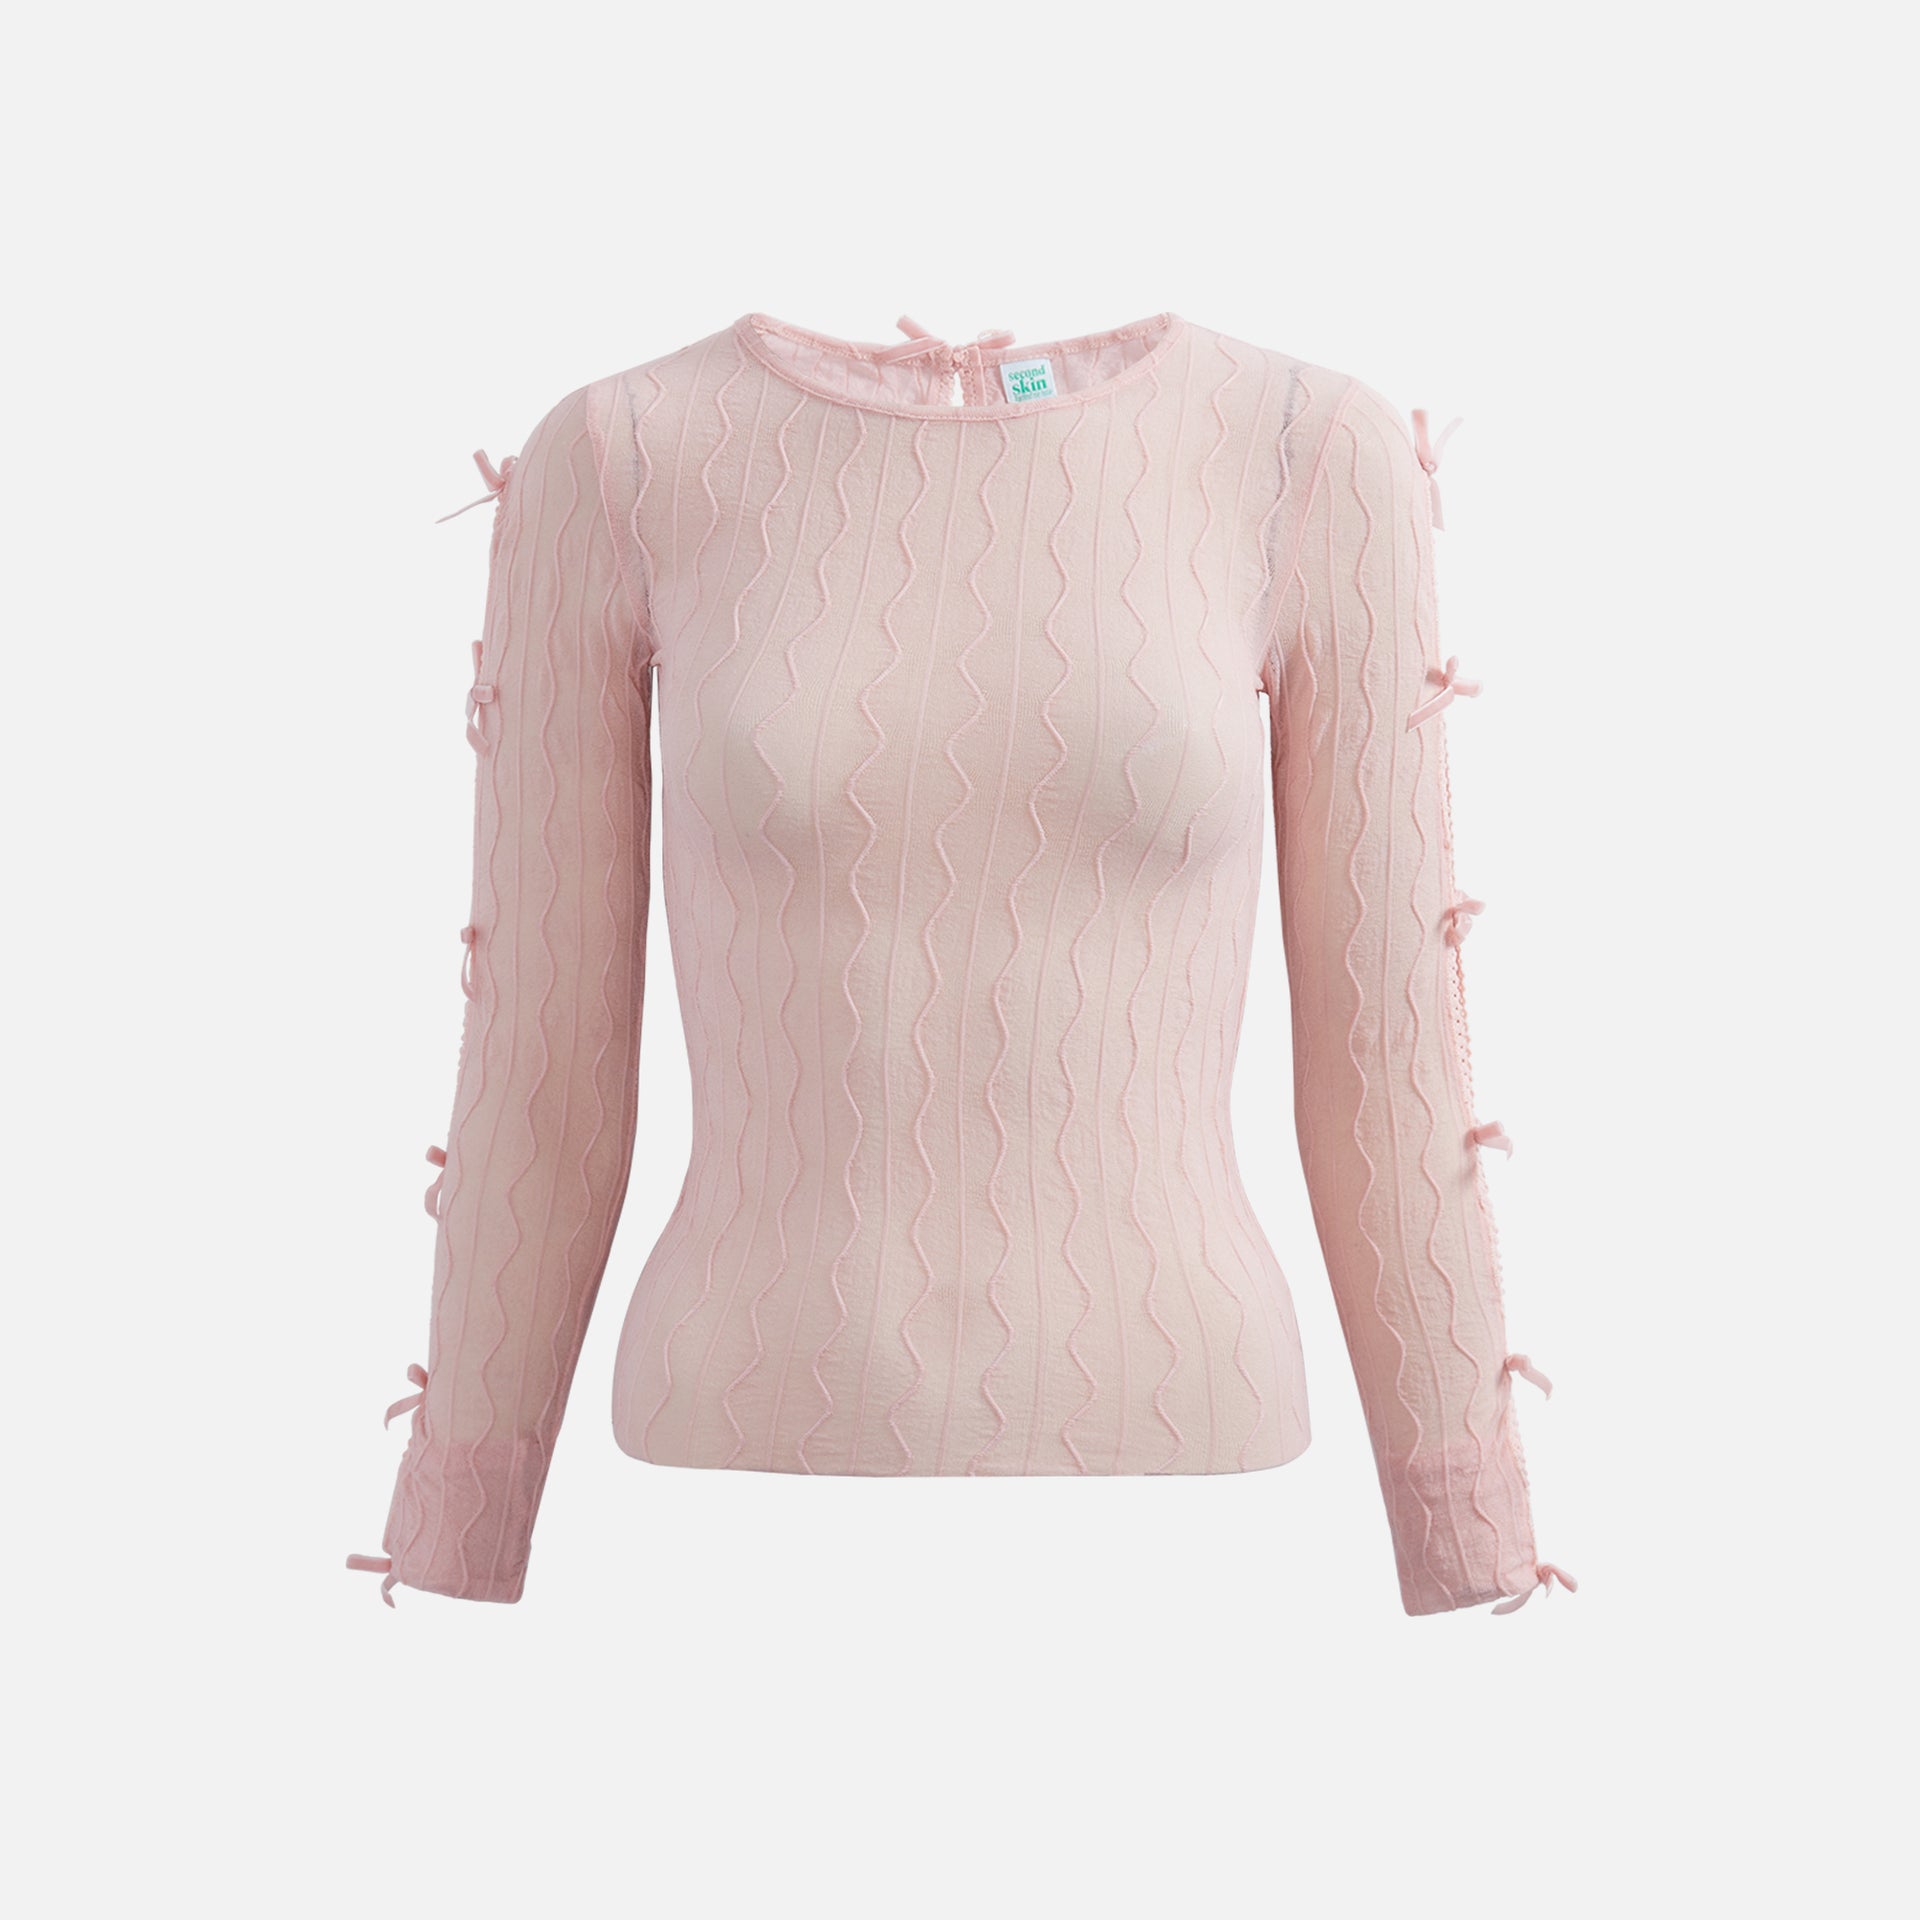 Second Skin Ross Bow Mockneck Top - Icy Pink